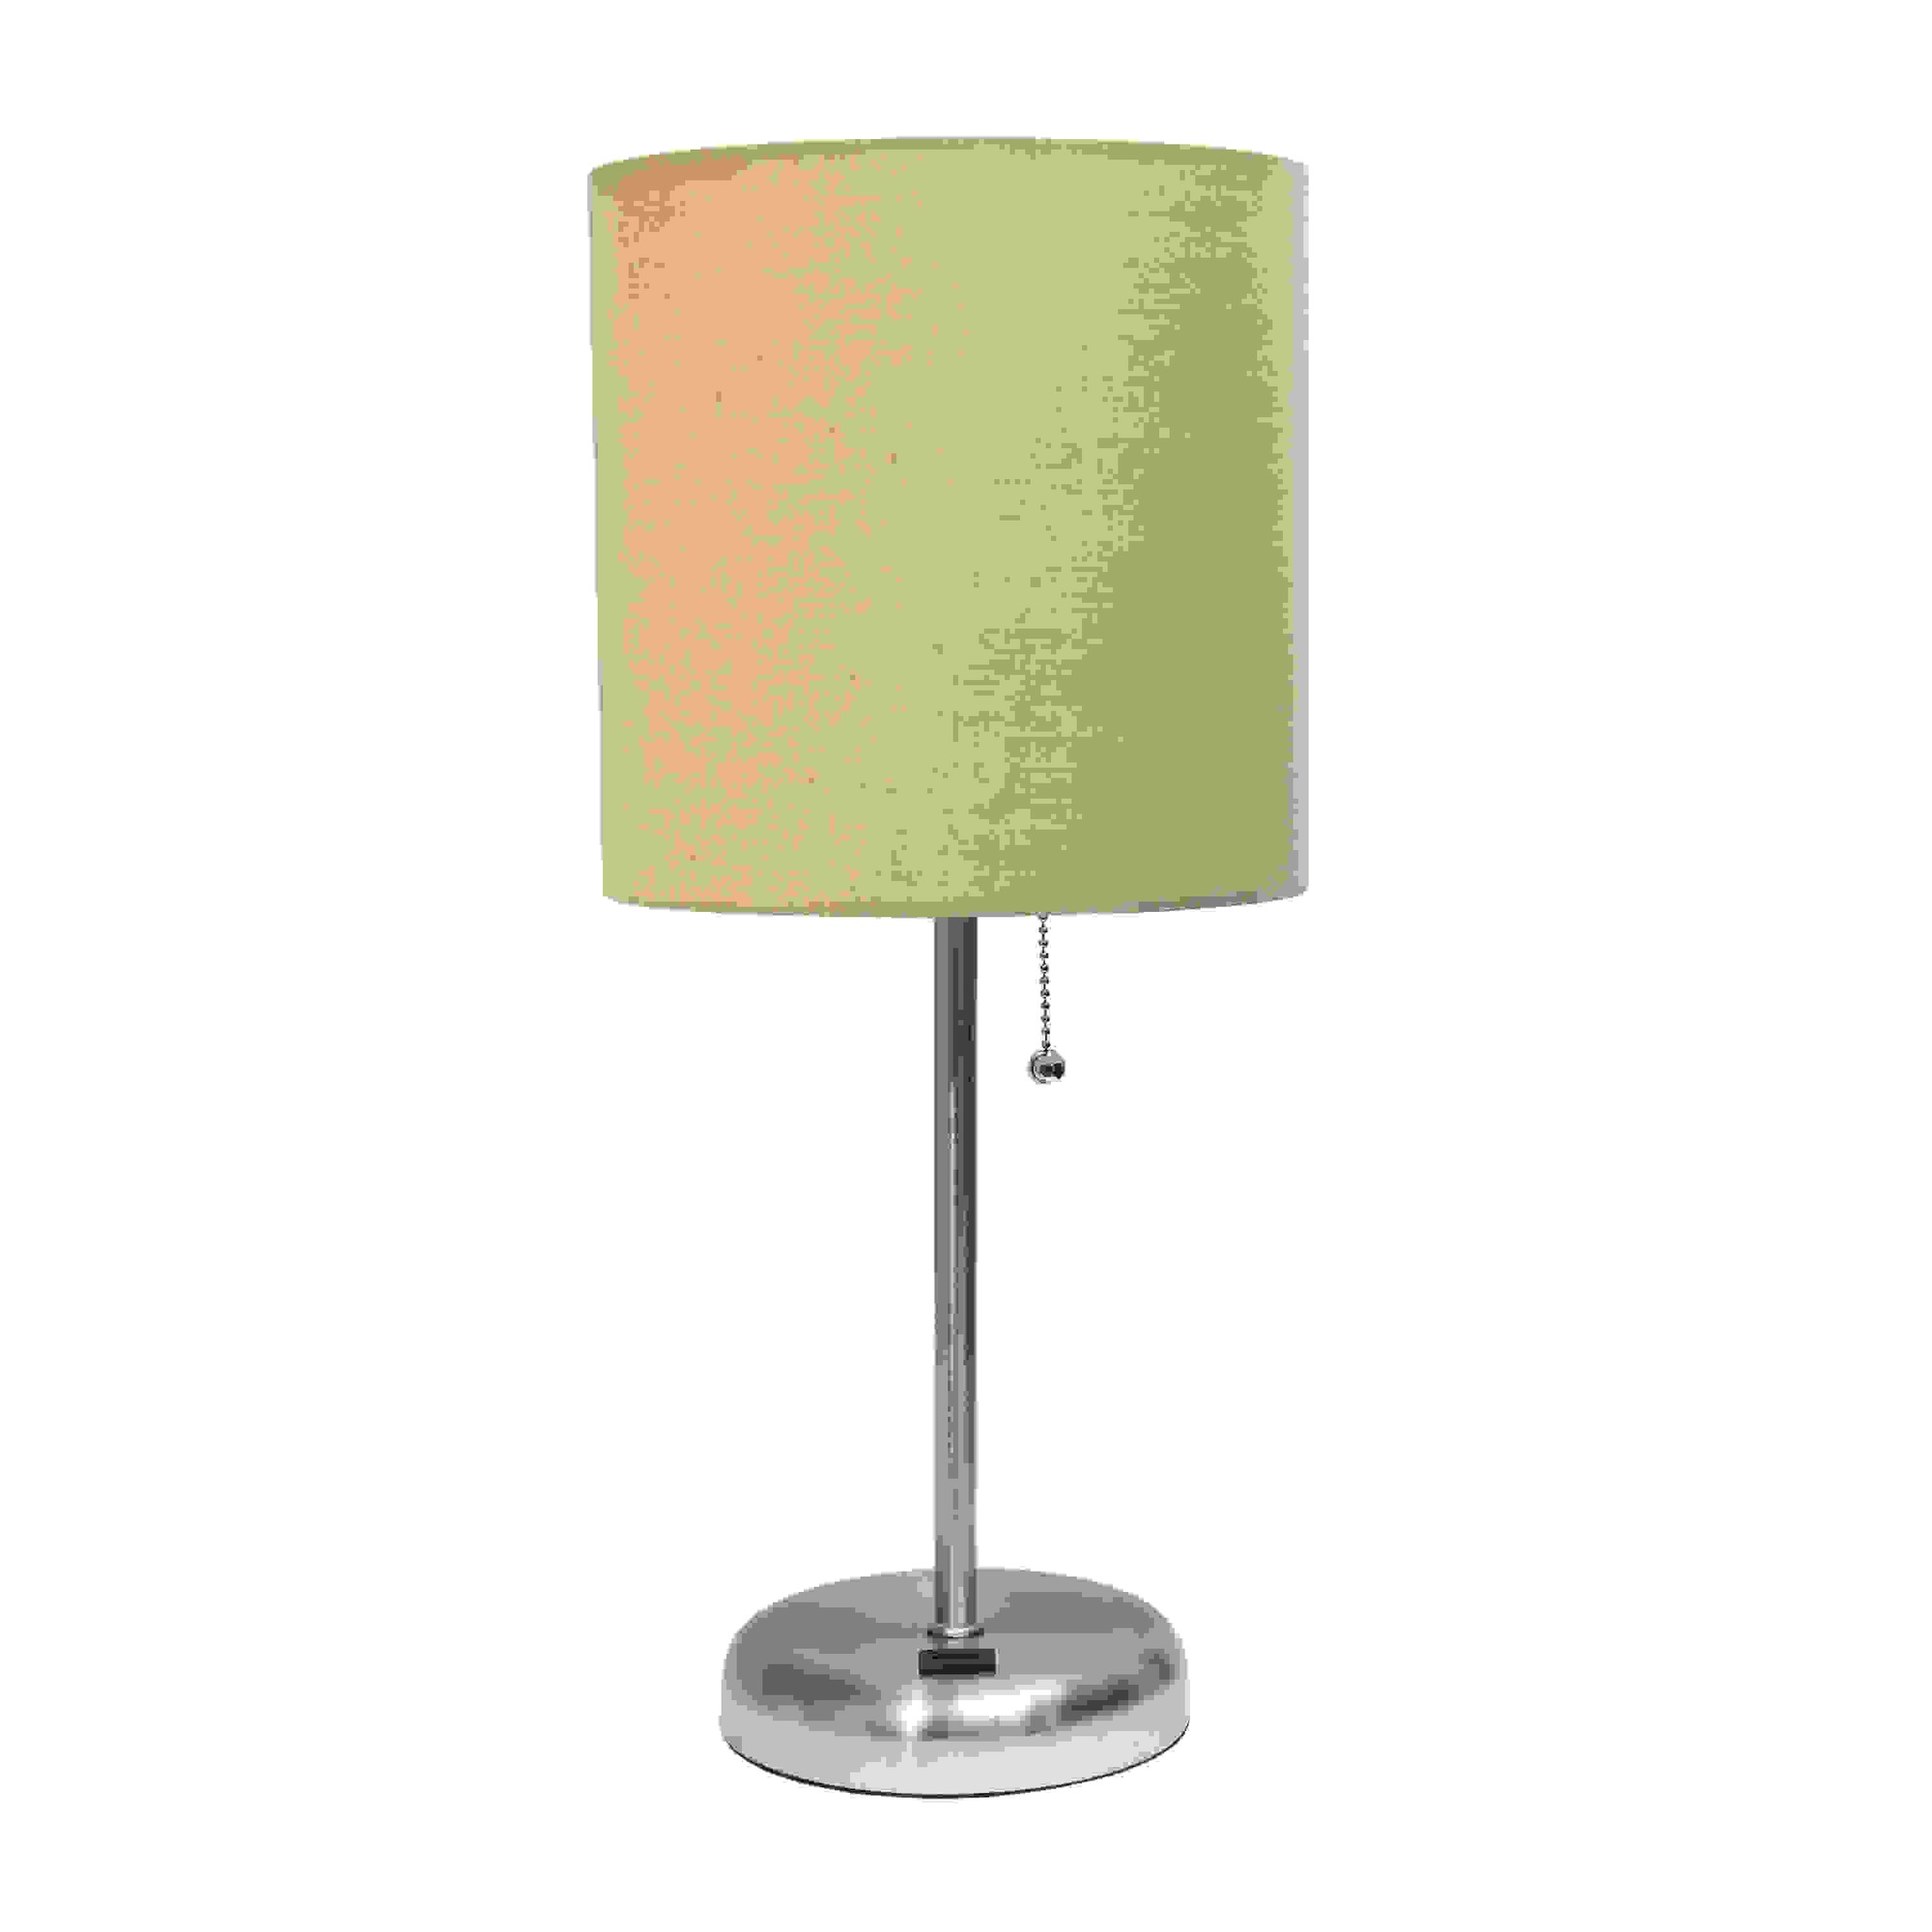 Simple Designs Stick Lamp with USB charging port and Fabric Shade, Tan